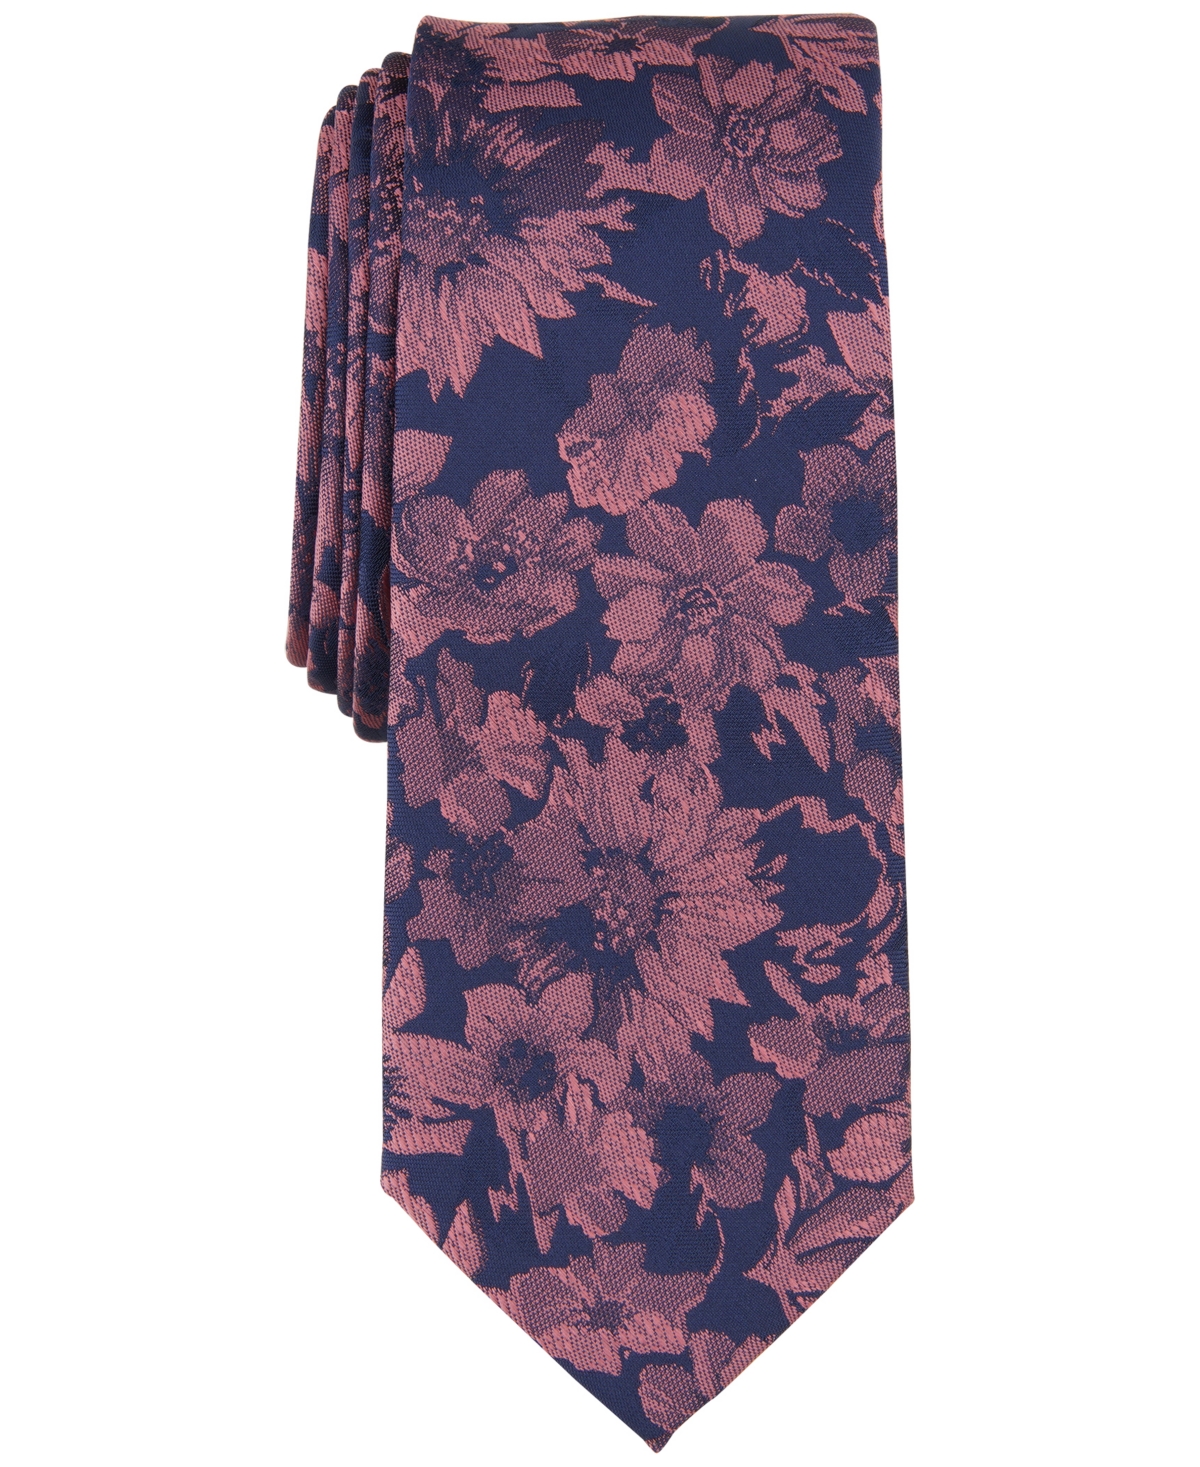 Men's Malaga Floral Tie, Created for Macy's - Black